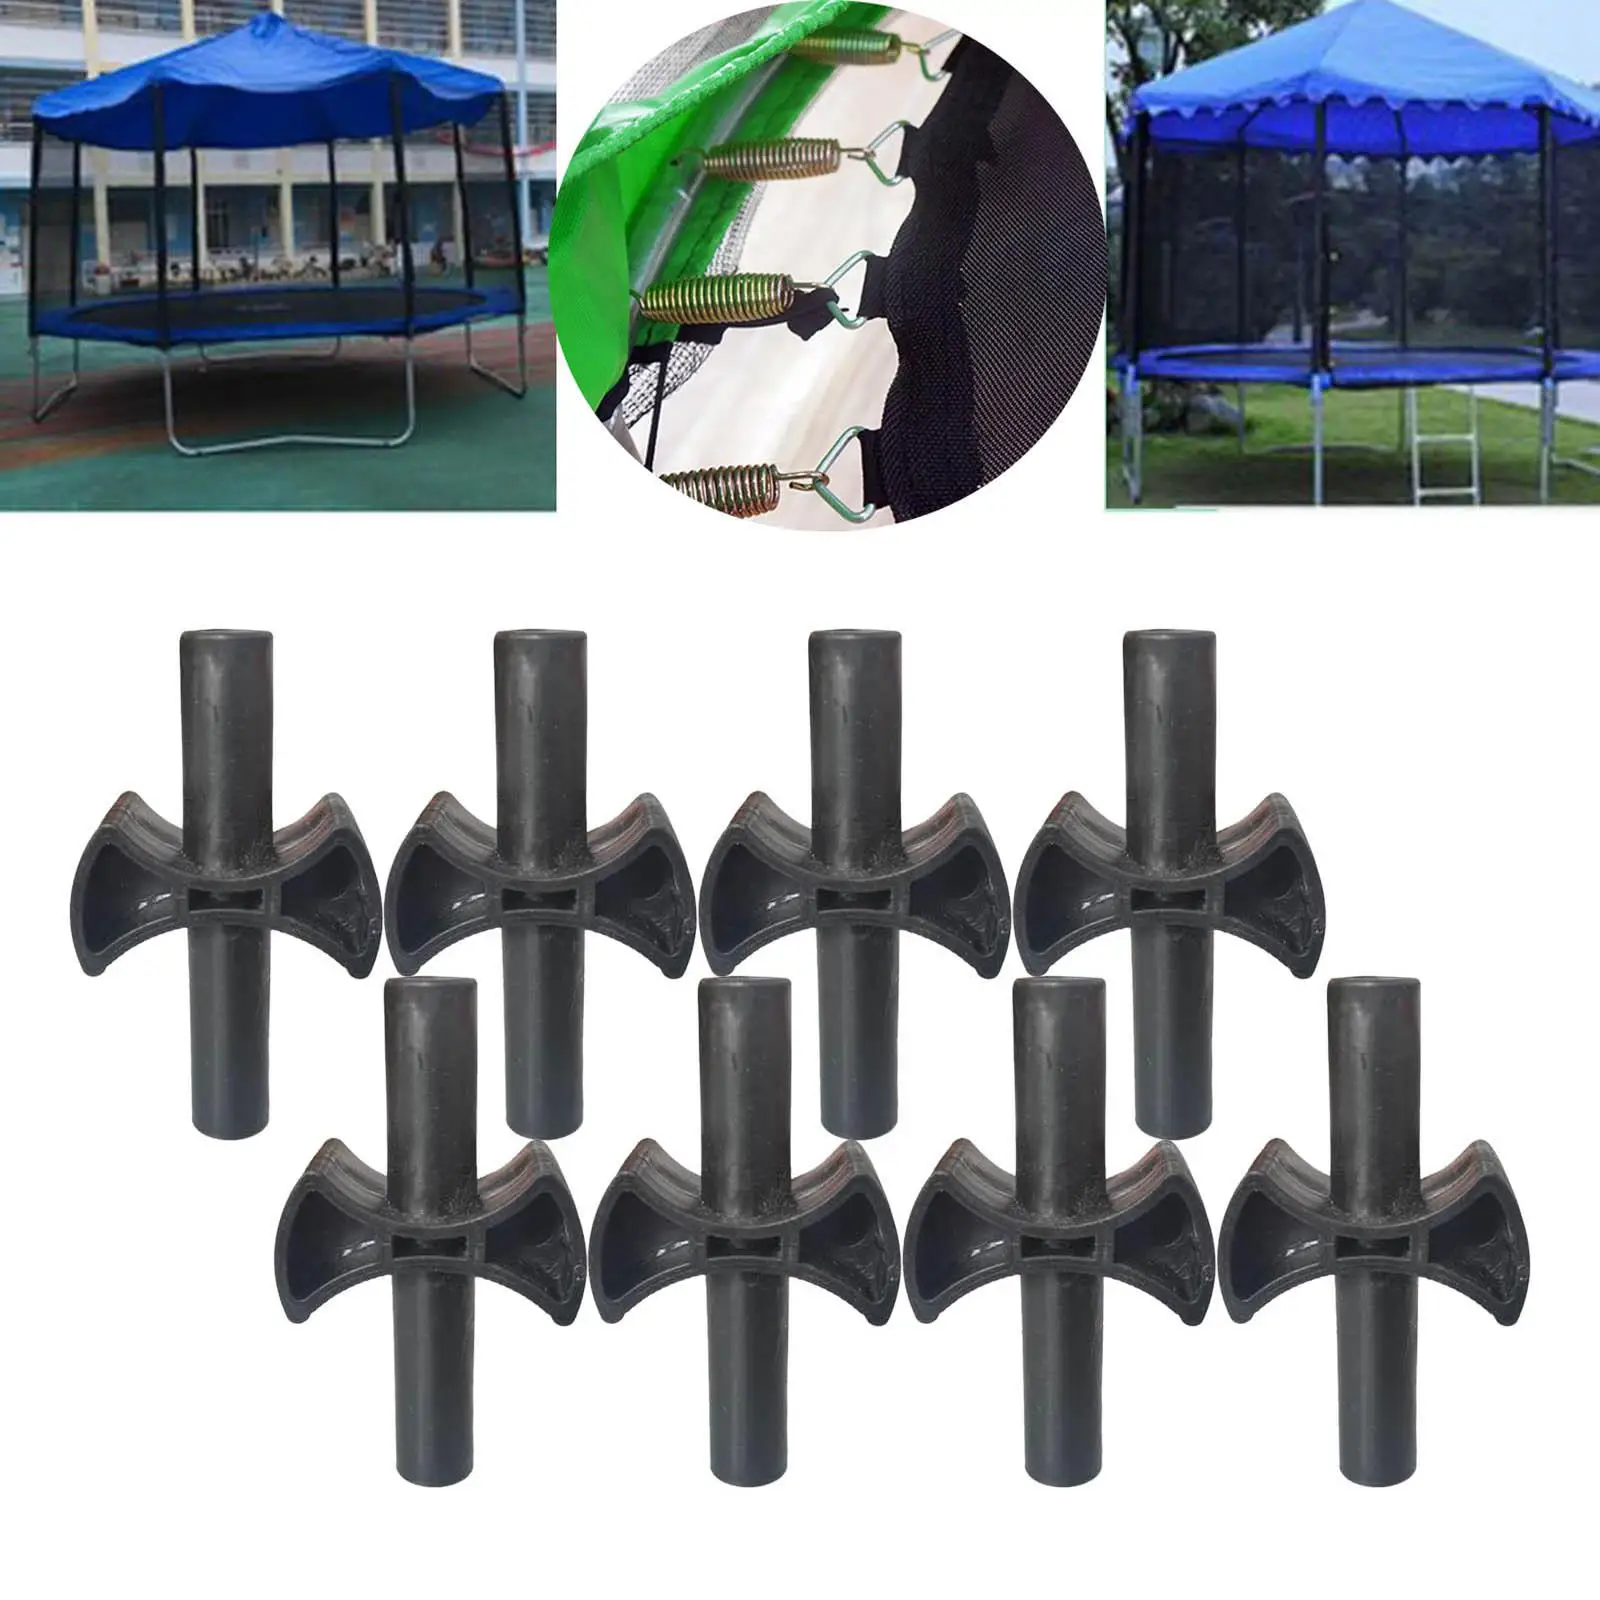 8pcs Black Trampoline Enclosure Pole Gap Spacers Trampoline Part for Fixing the